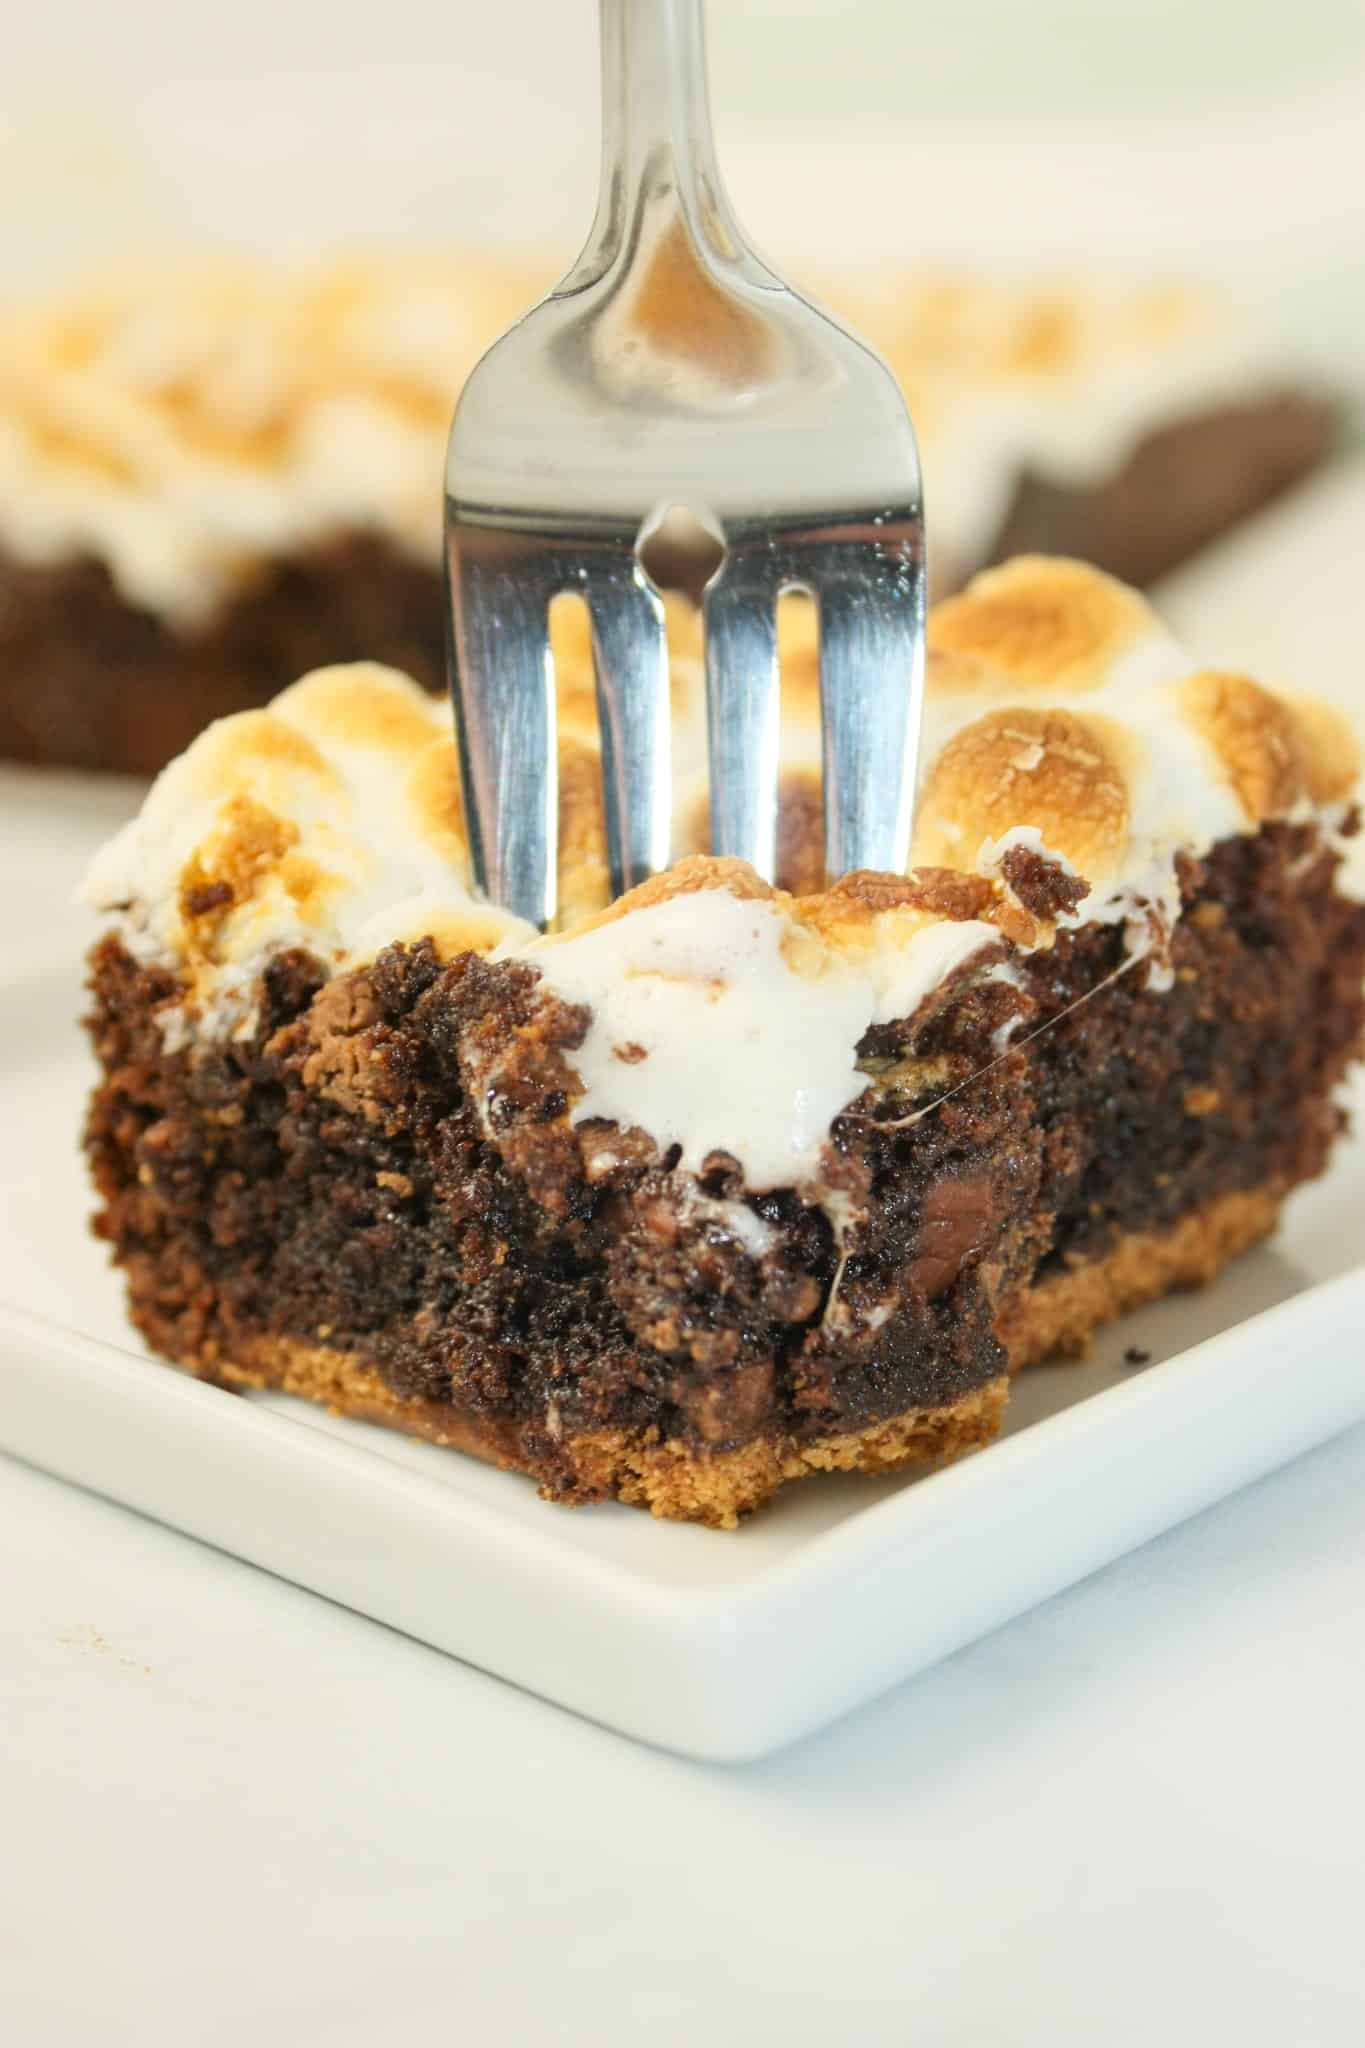 These chewy chocolate S'mores Brownies are a decadent treat if you have been avoiding desserts due to a gluten intolerance.